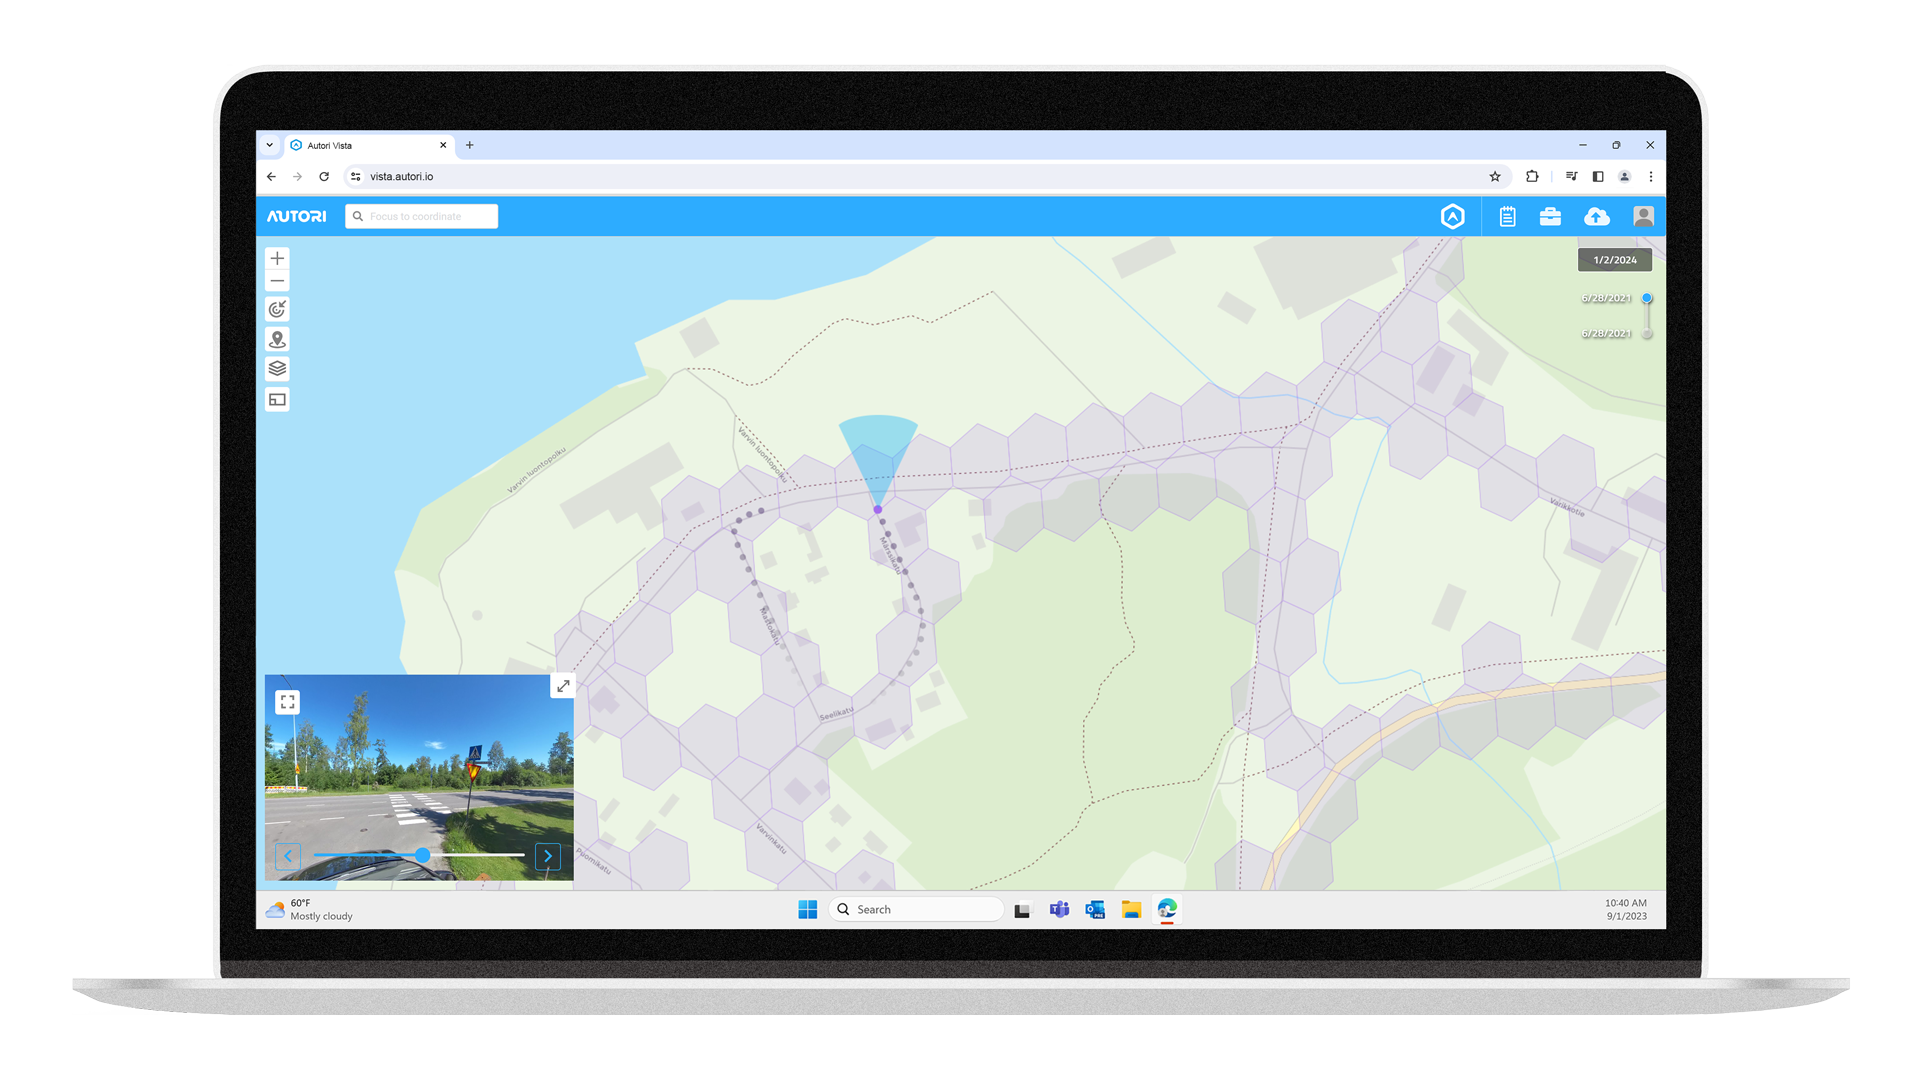 Vista image viewer for street view image data, drone images or car cameras